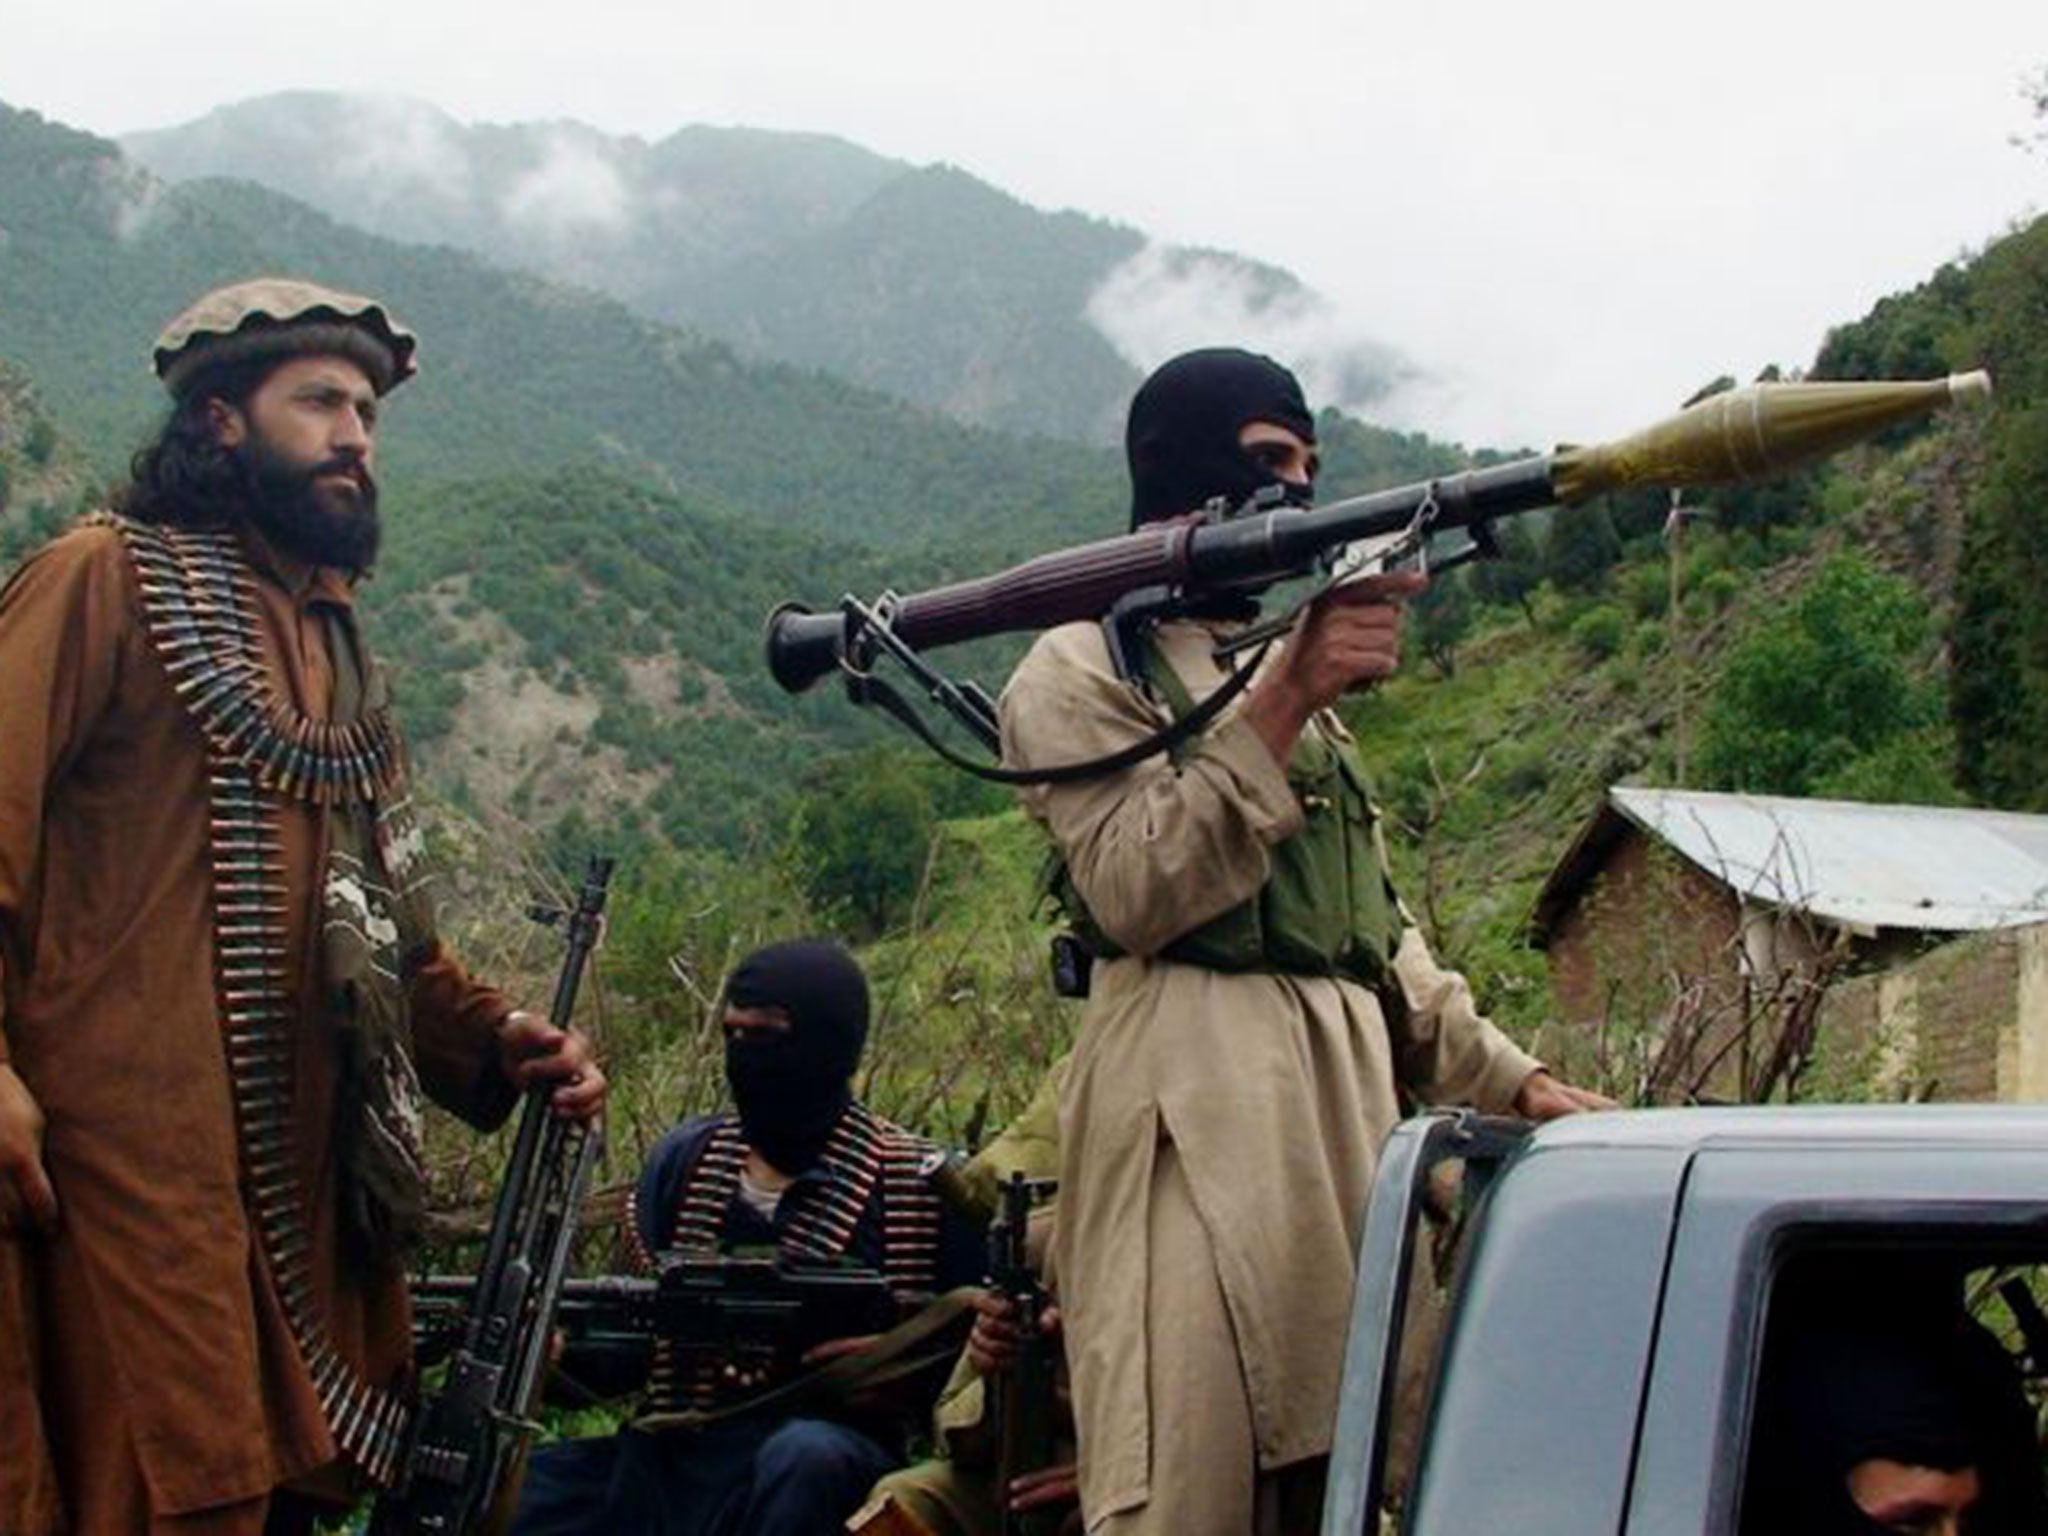 The Pakistani army said it has launched a "comprehensive operation" against foreign and local militants in a tribal region near the Afghan border